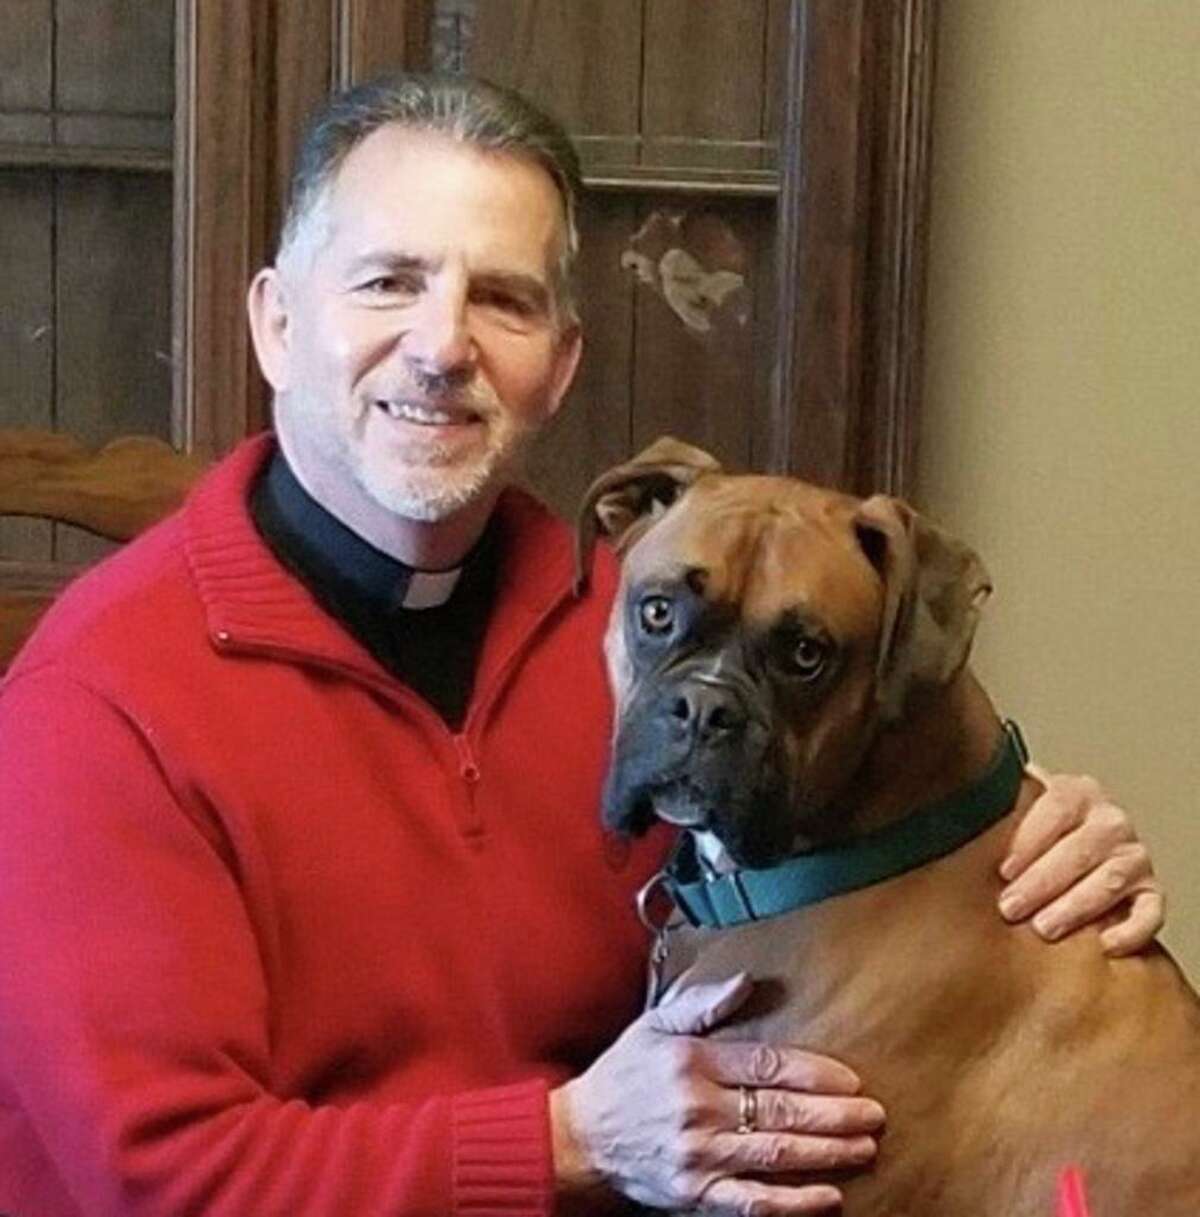 The Rev. John Antonelle, pastor of St. Mary Church in Portland with his — and the parish’s — dog, Patsy.